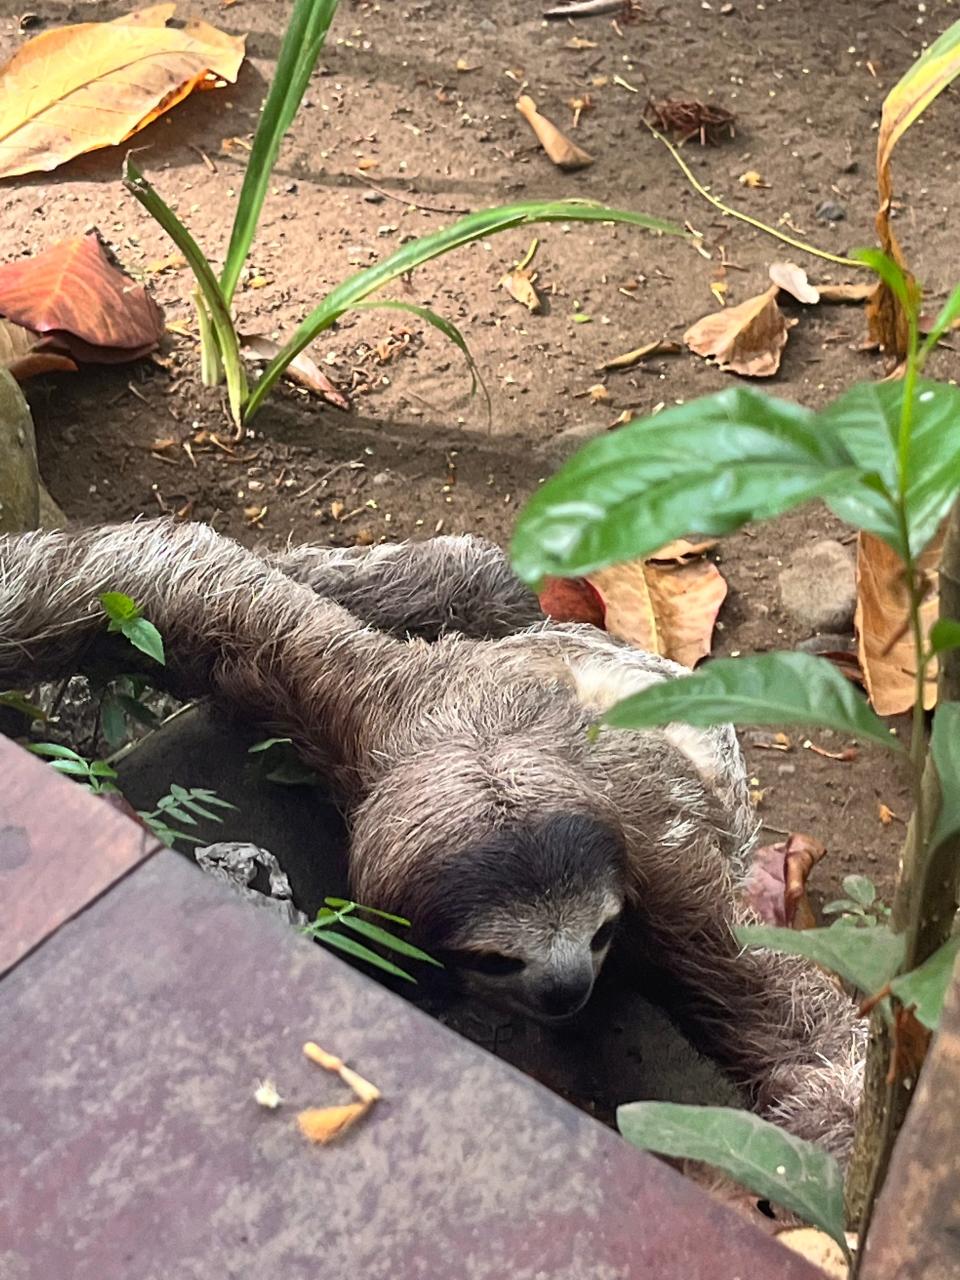 A sloth Ash Jurberg and his wife met on a trip to Costa Rica